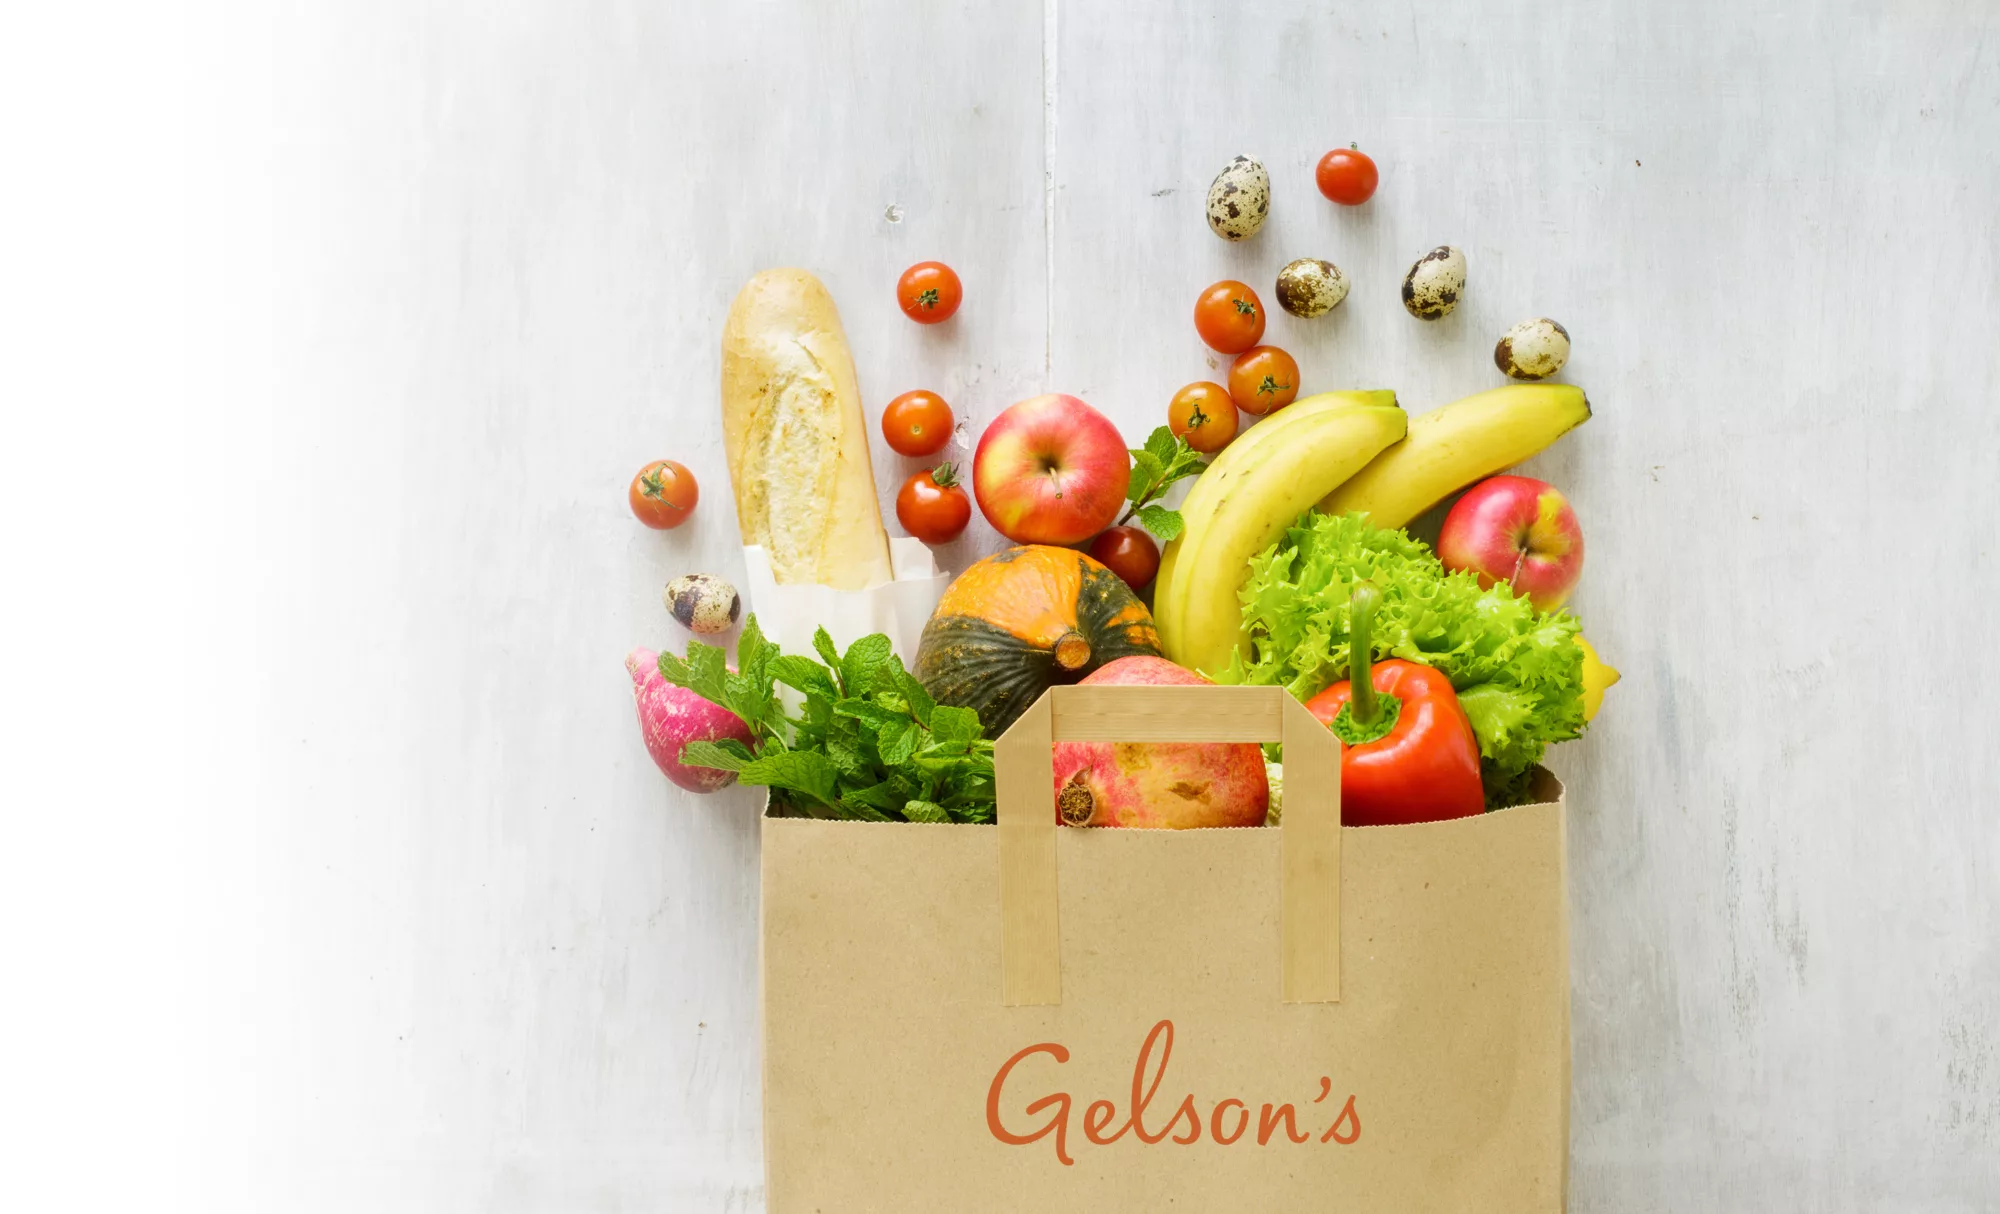 Grocery bag with Gelson's logo filled with fresh fruit and vegetables